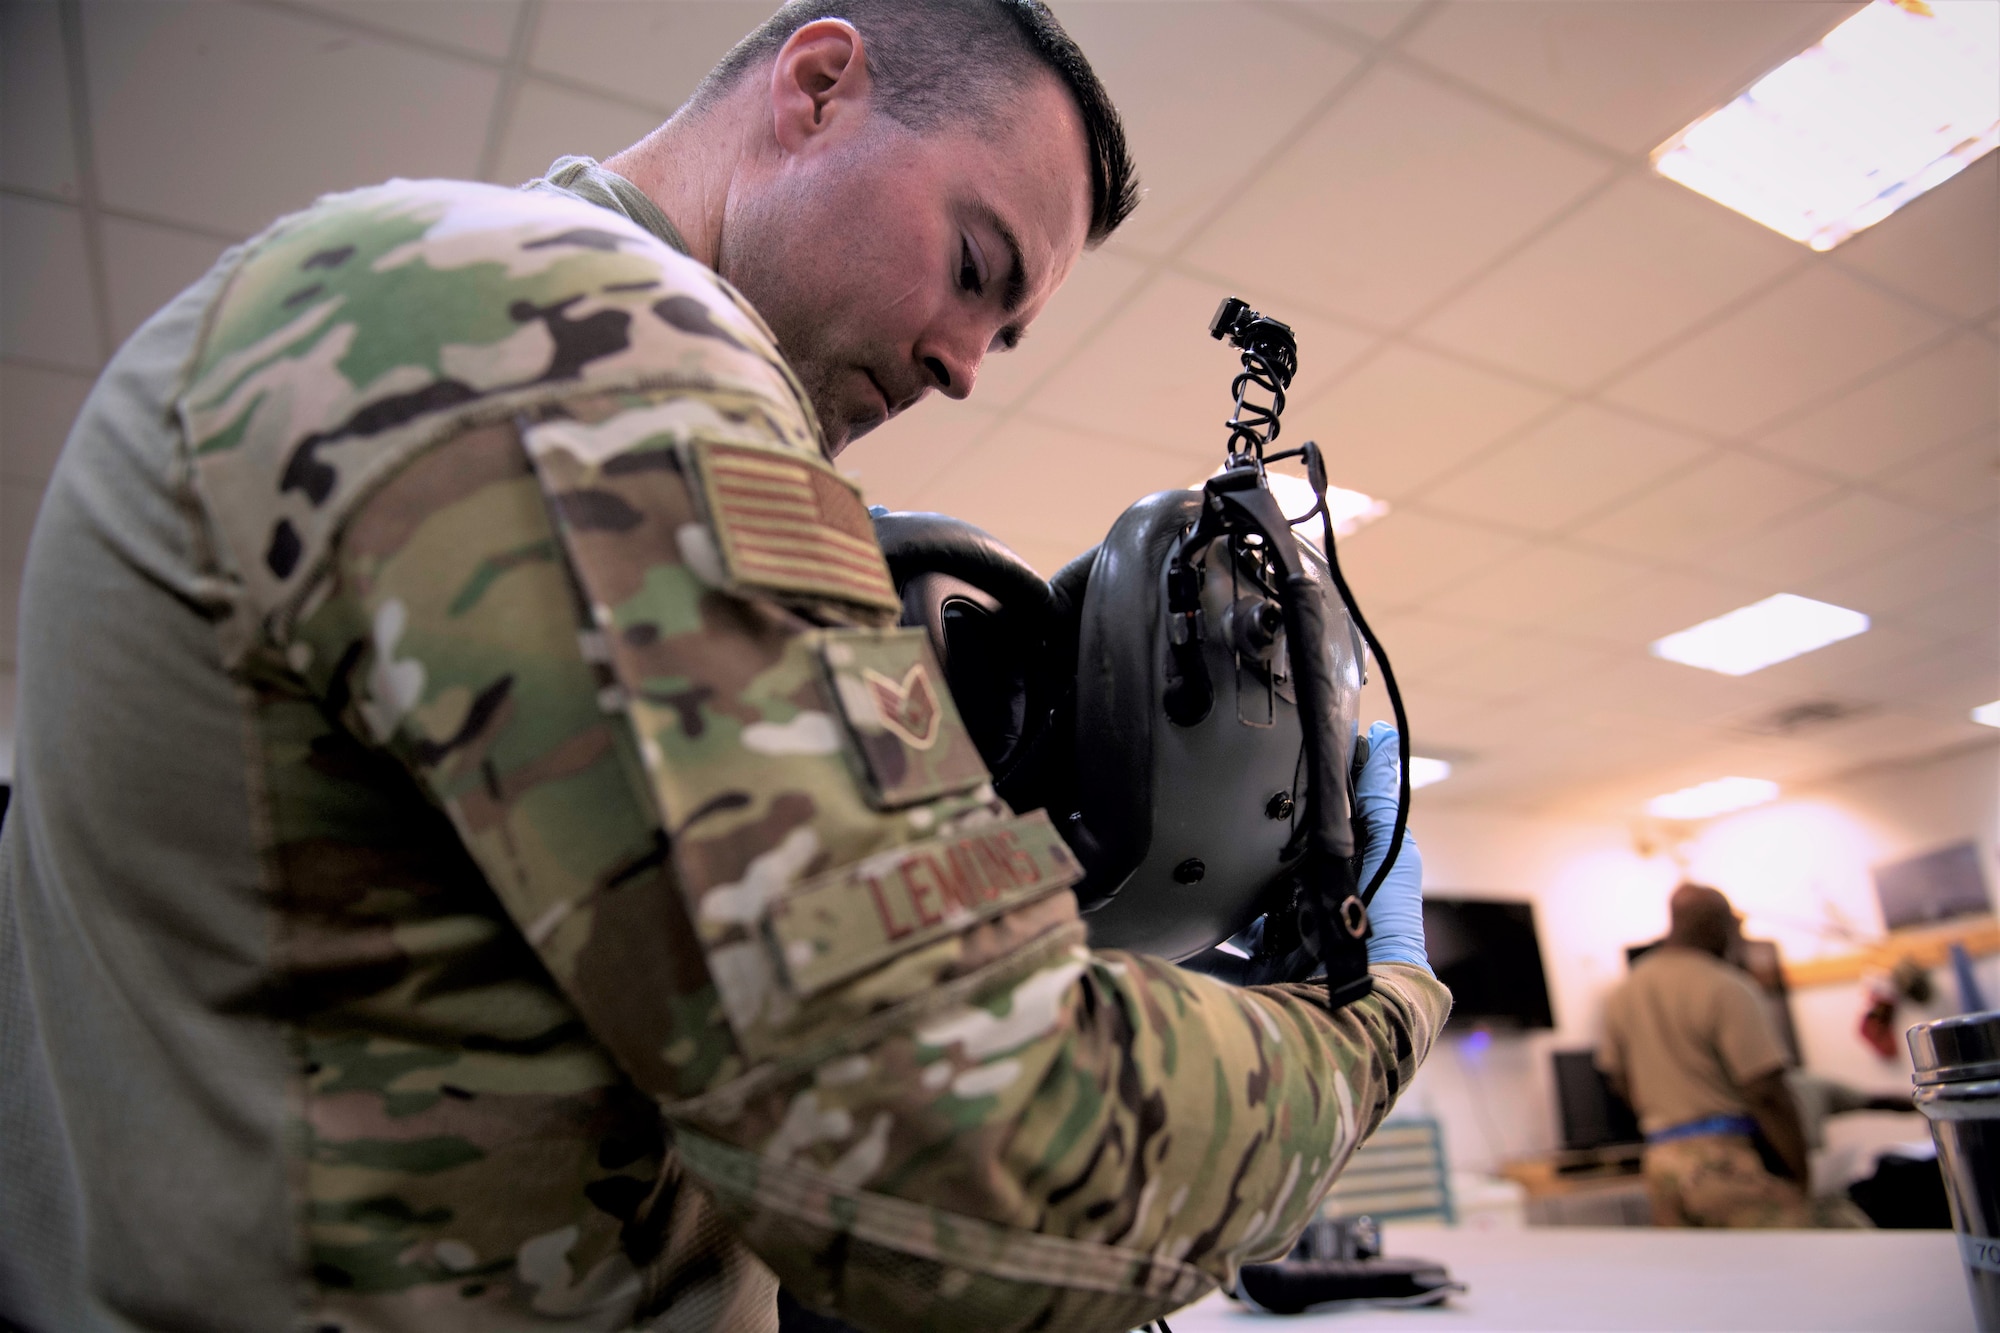 U.S. Air Force Staff Sgt. Zane Lemons, 779th Expeditionary Airlift Squadron aircrew flight equipment journeyman, inspects a flight helmet before certifying it for in-flight operations on Ali Al Salem Air Base, Kuwait, July 3, 2019. Aircrew flight equipment technicians provide vital life support equipment for aircrew members traveling around the U.S. Central Command area of responsibility. Lemons is deployed from the 120th Airlift Wing, Montana Air National Guard. (U.S. Air Force photo by Tech. Sgt. Michael Mason)